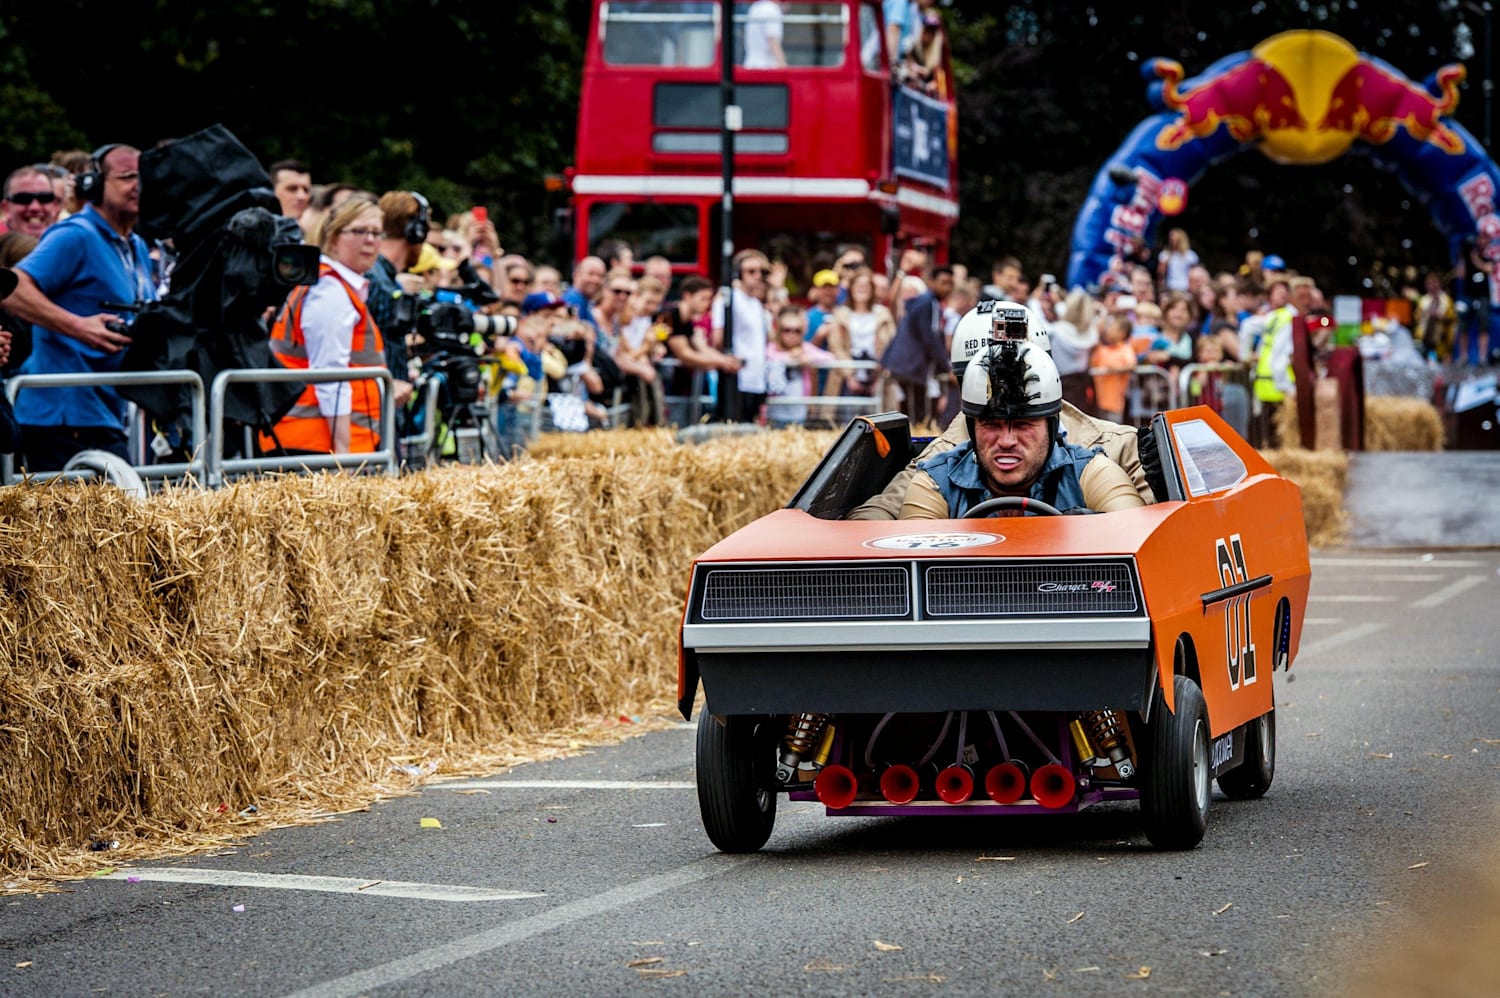 red bull soapbox entry cost